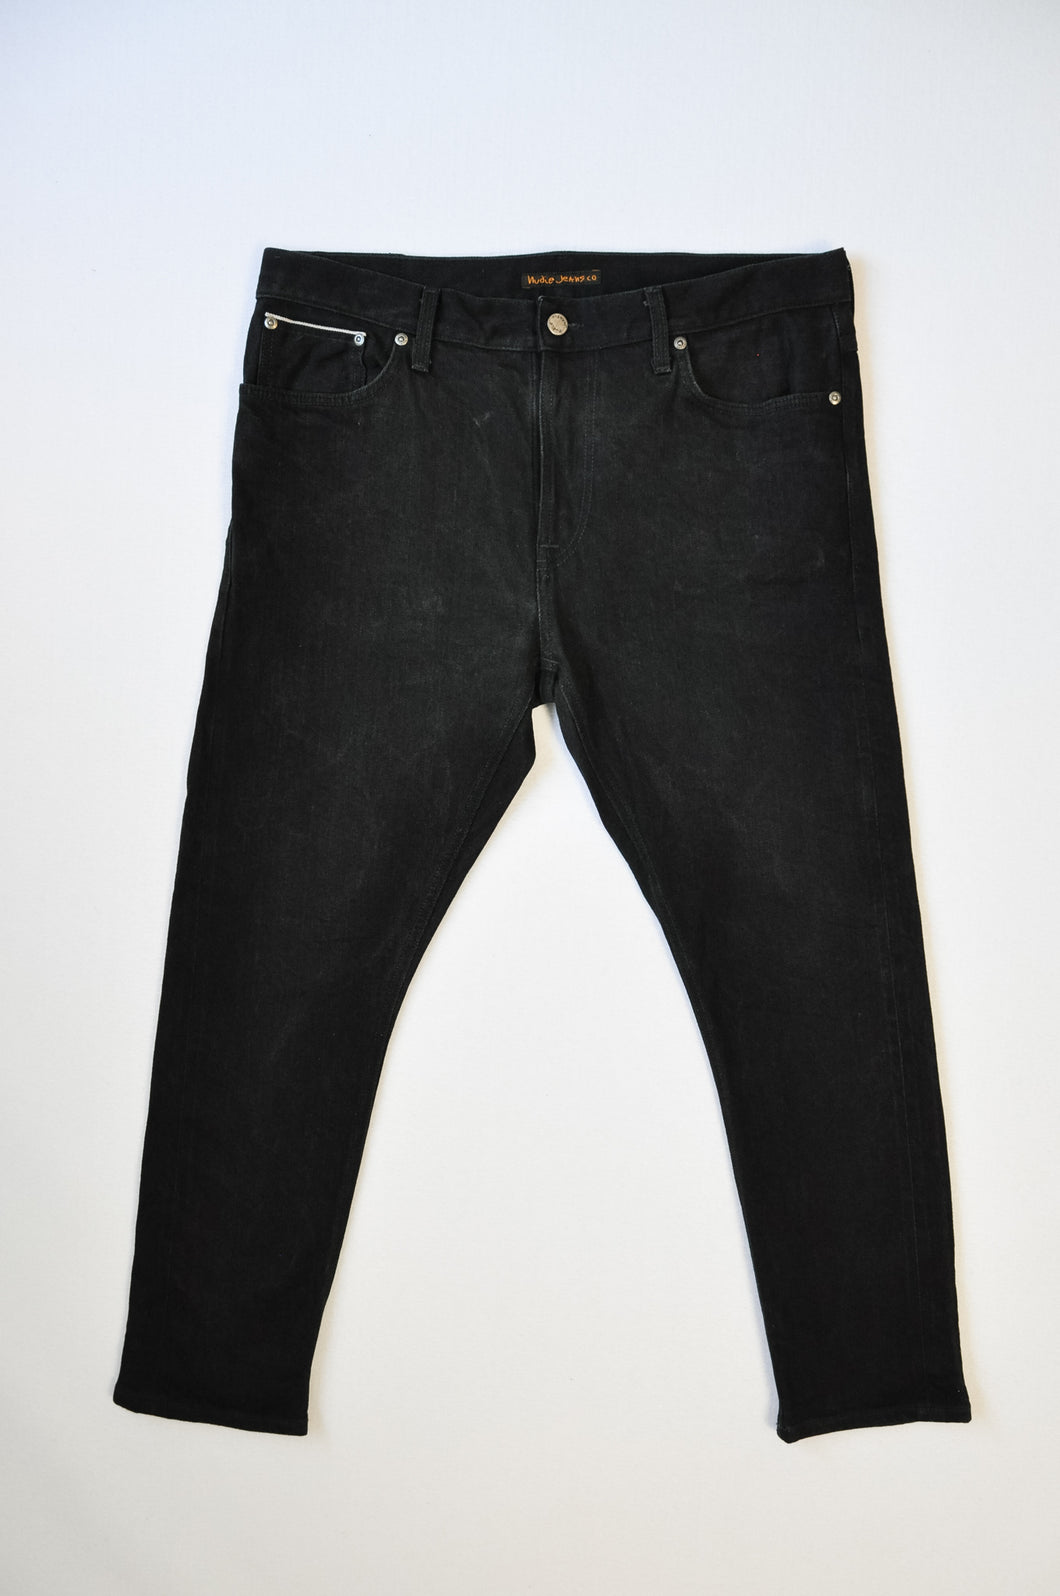 Nudie Jeans Co. Brute Knut Selvedge Jeans | 36